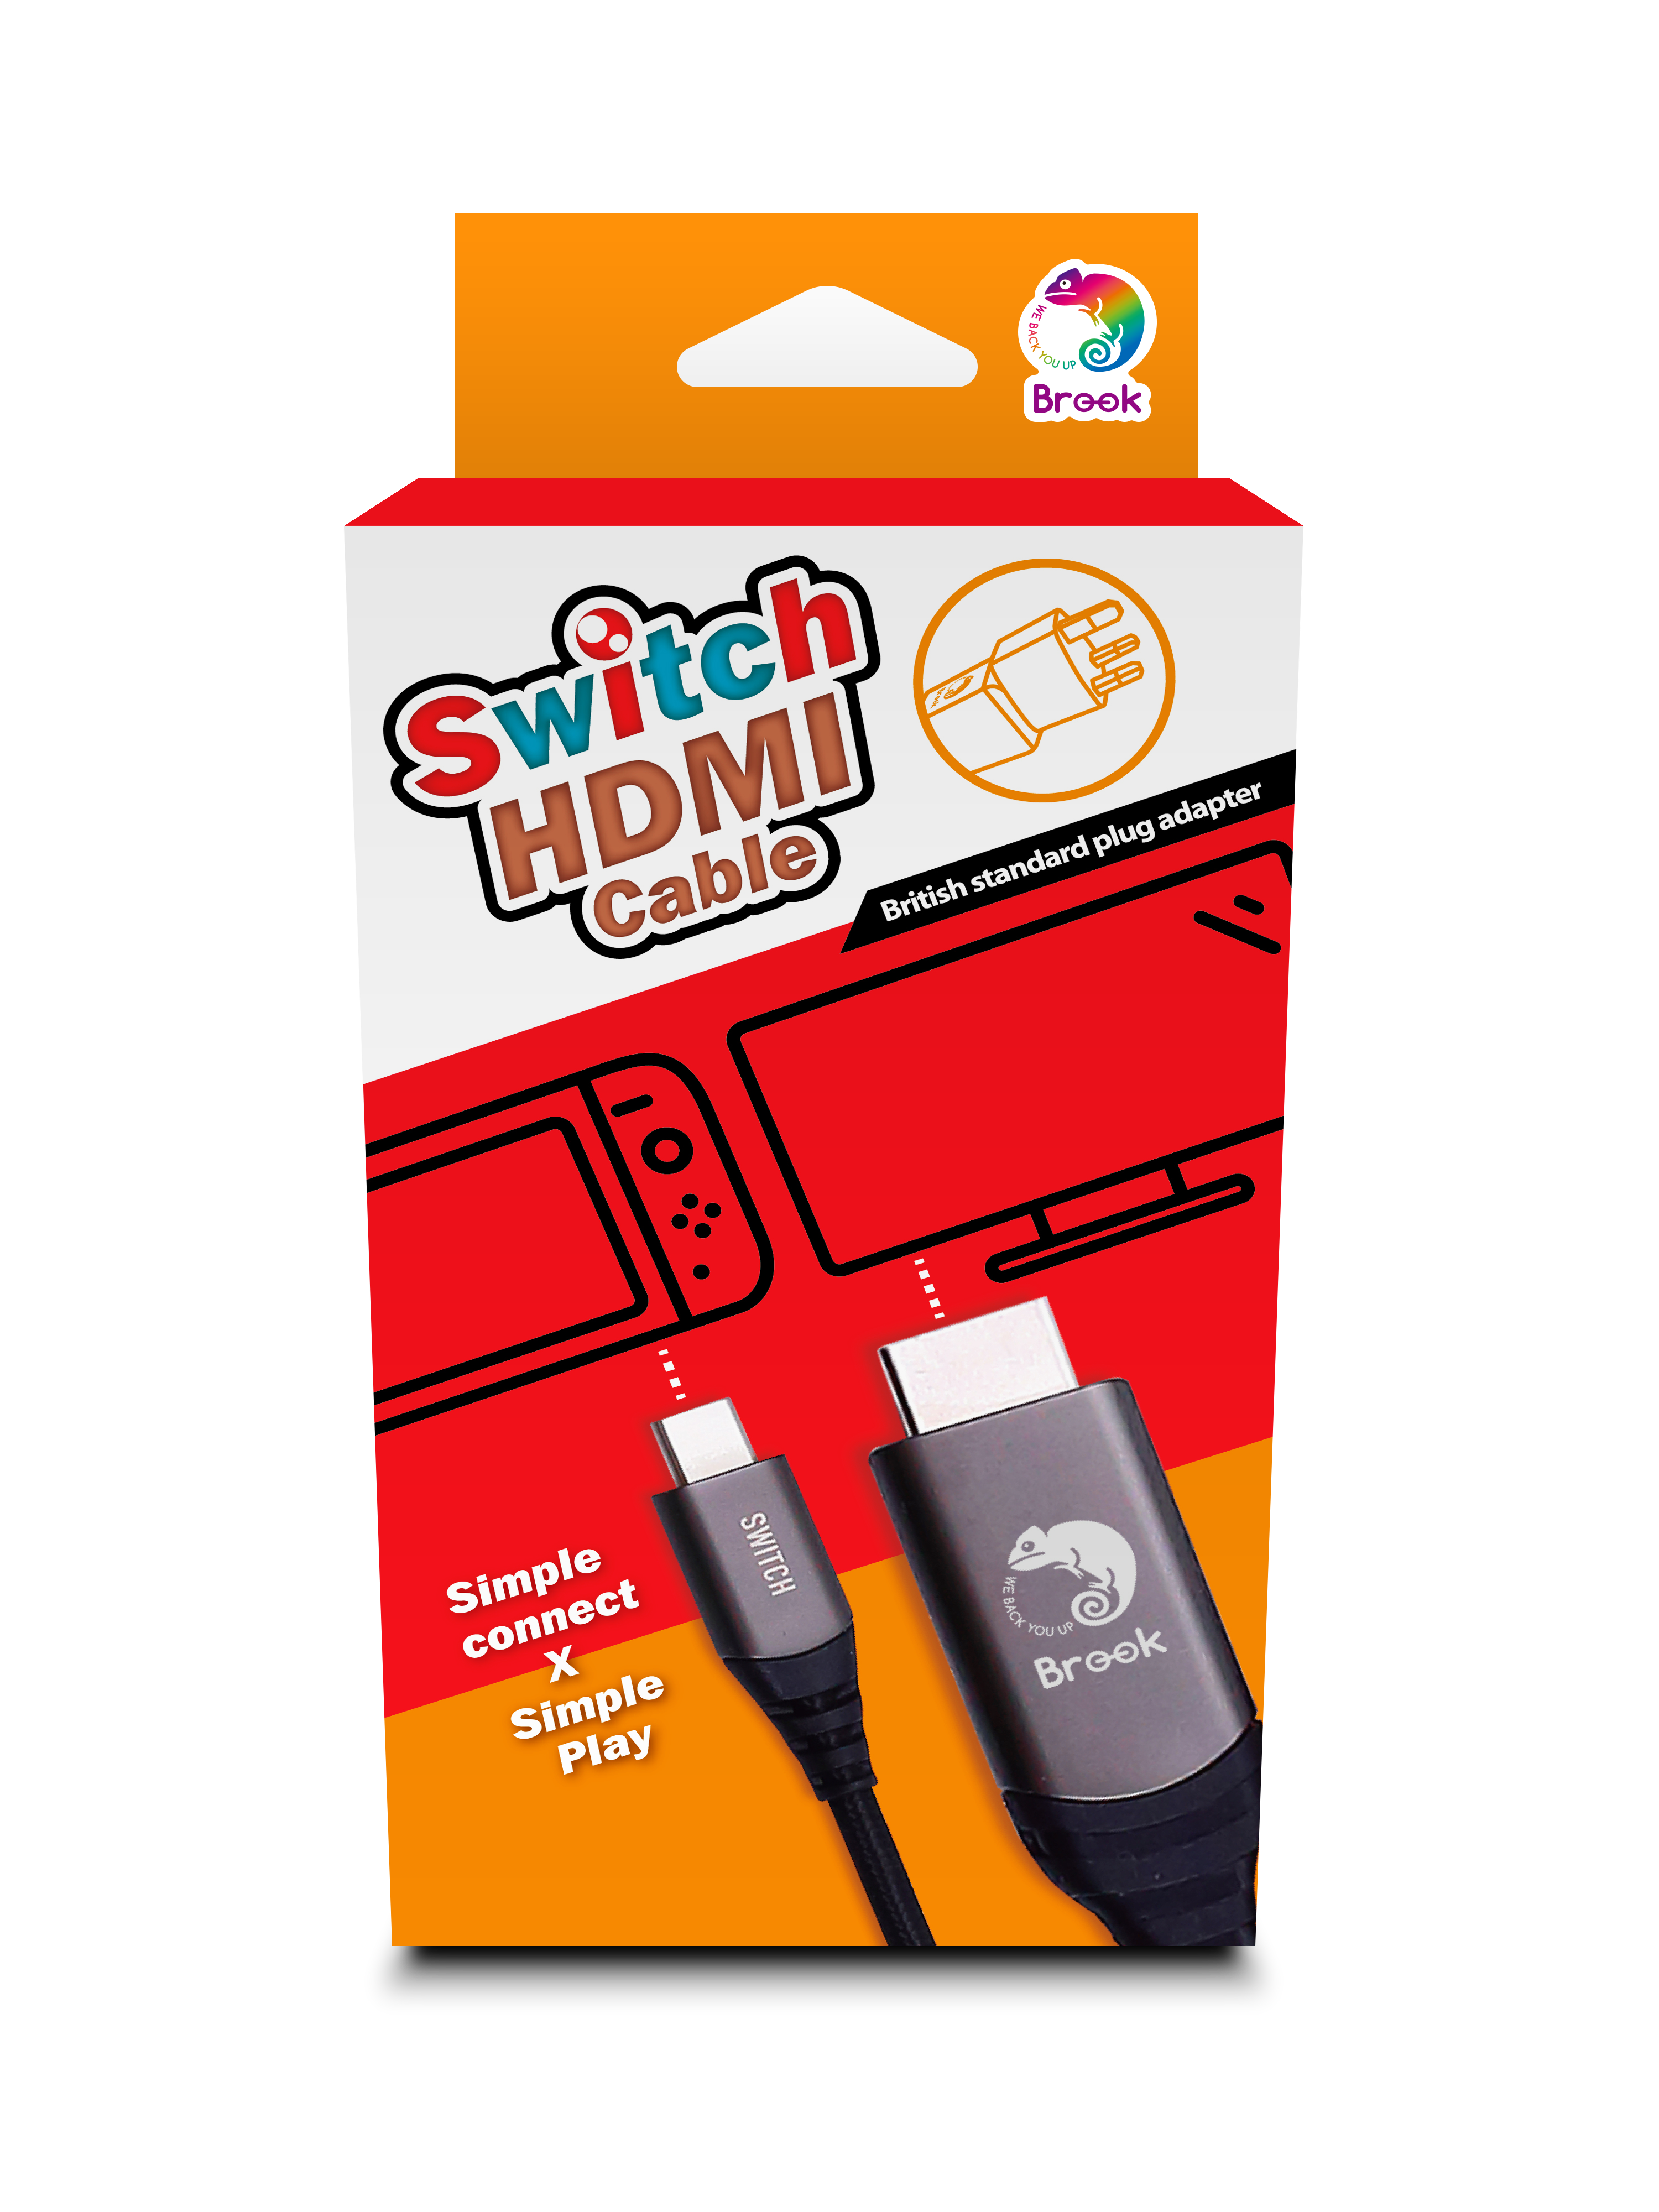 HDMI Cable - Brook